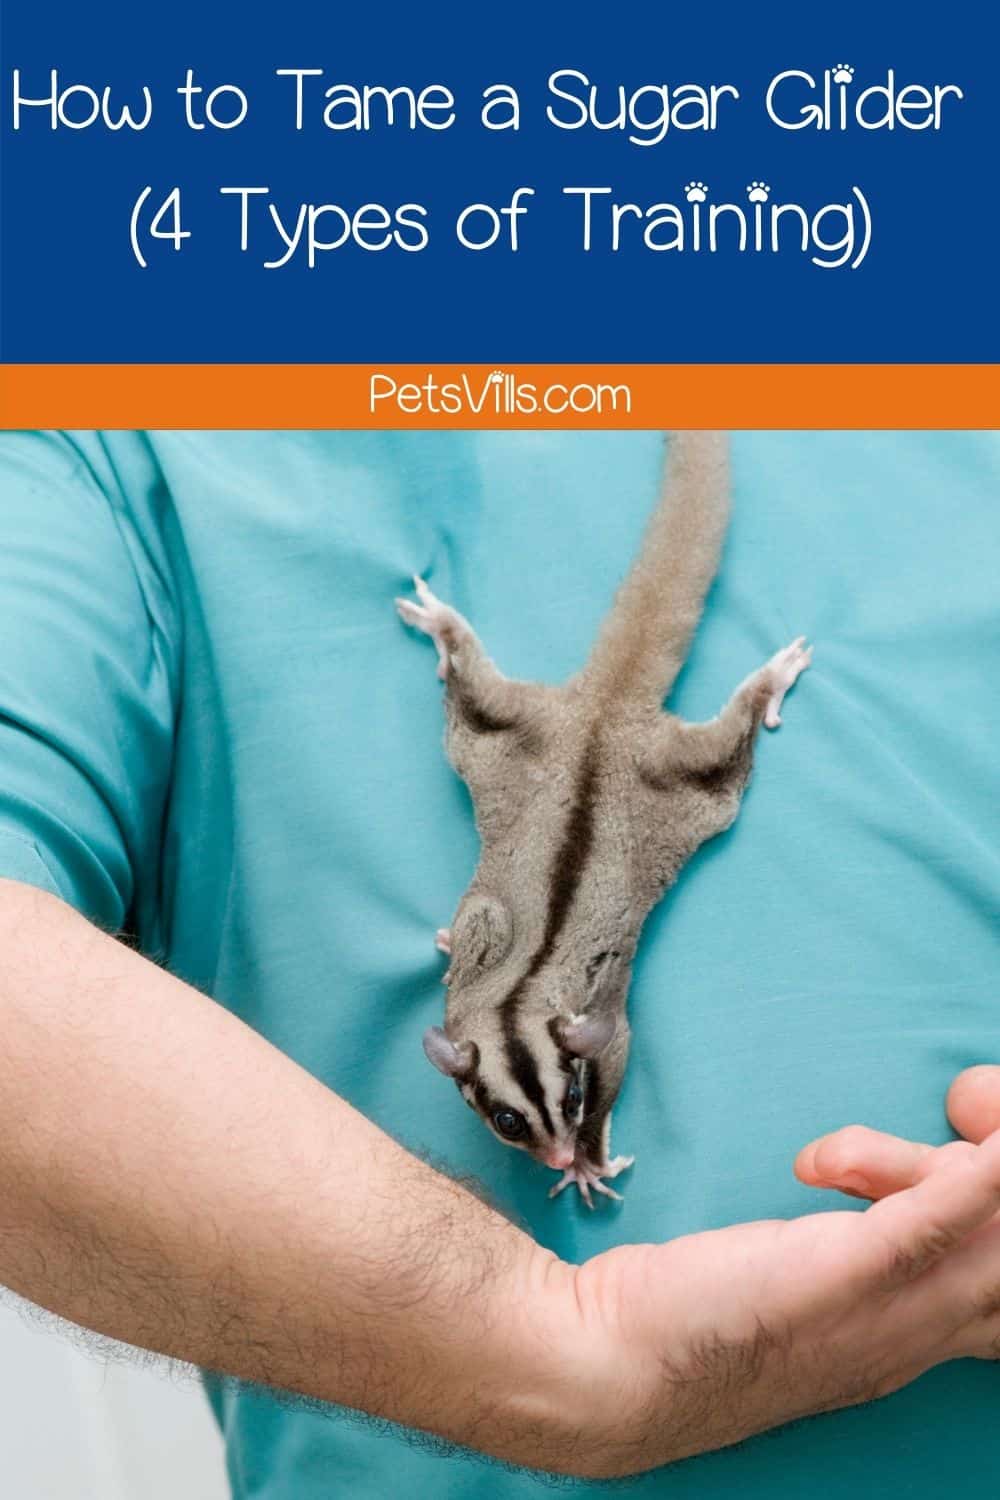 How to Train a Sugar Glider (Detailed Guide with 4 Methods)